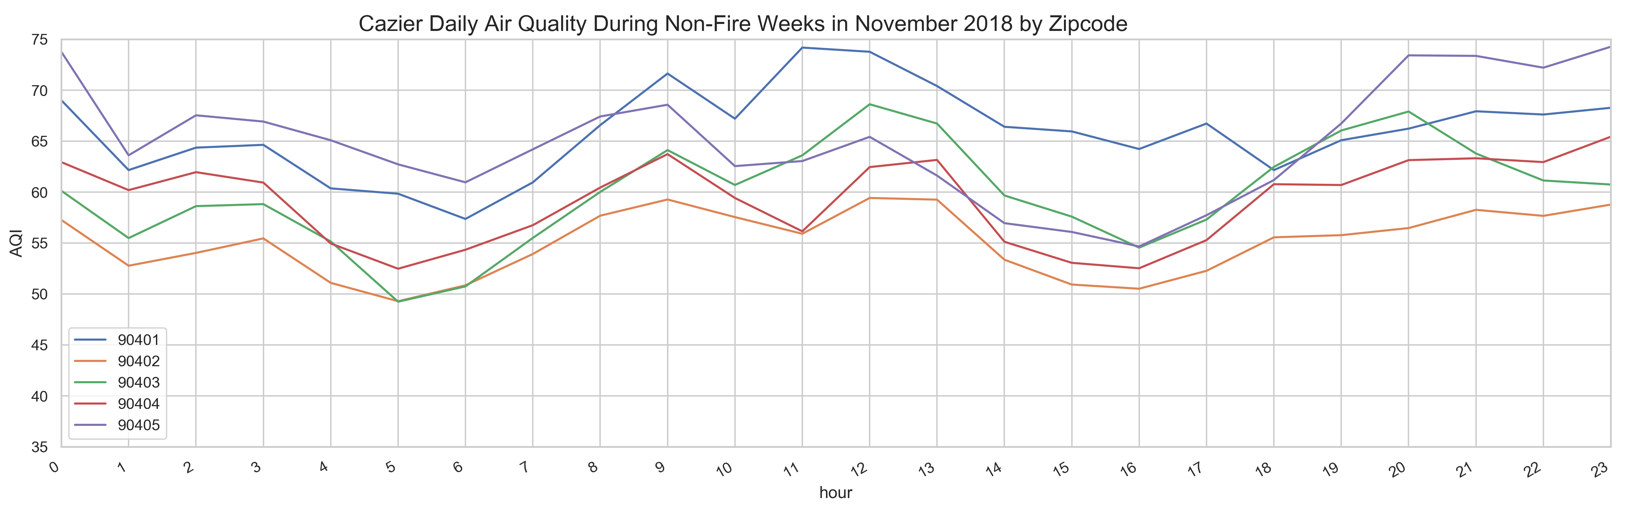 Average hourly air quality on non-fire days, by Santa Monica ZIP code, in November 2018